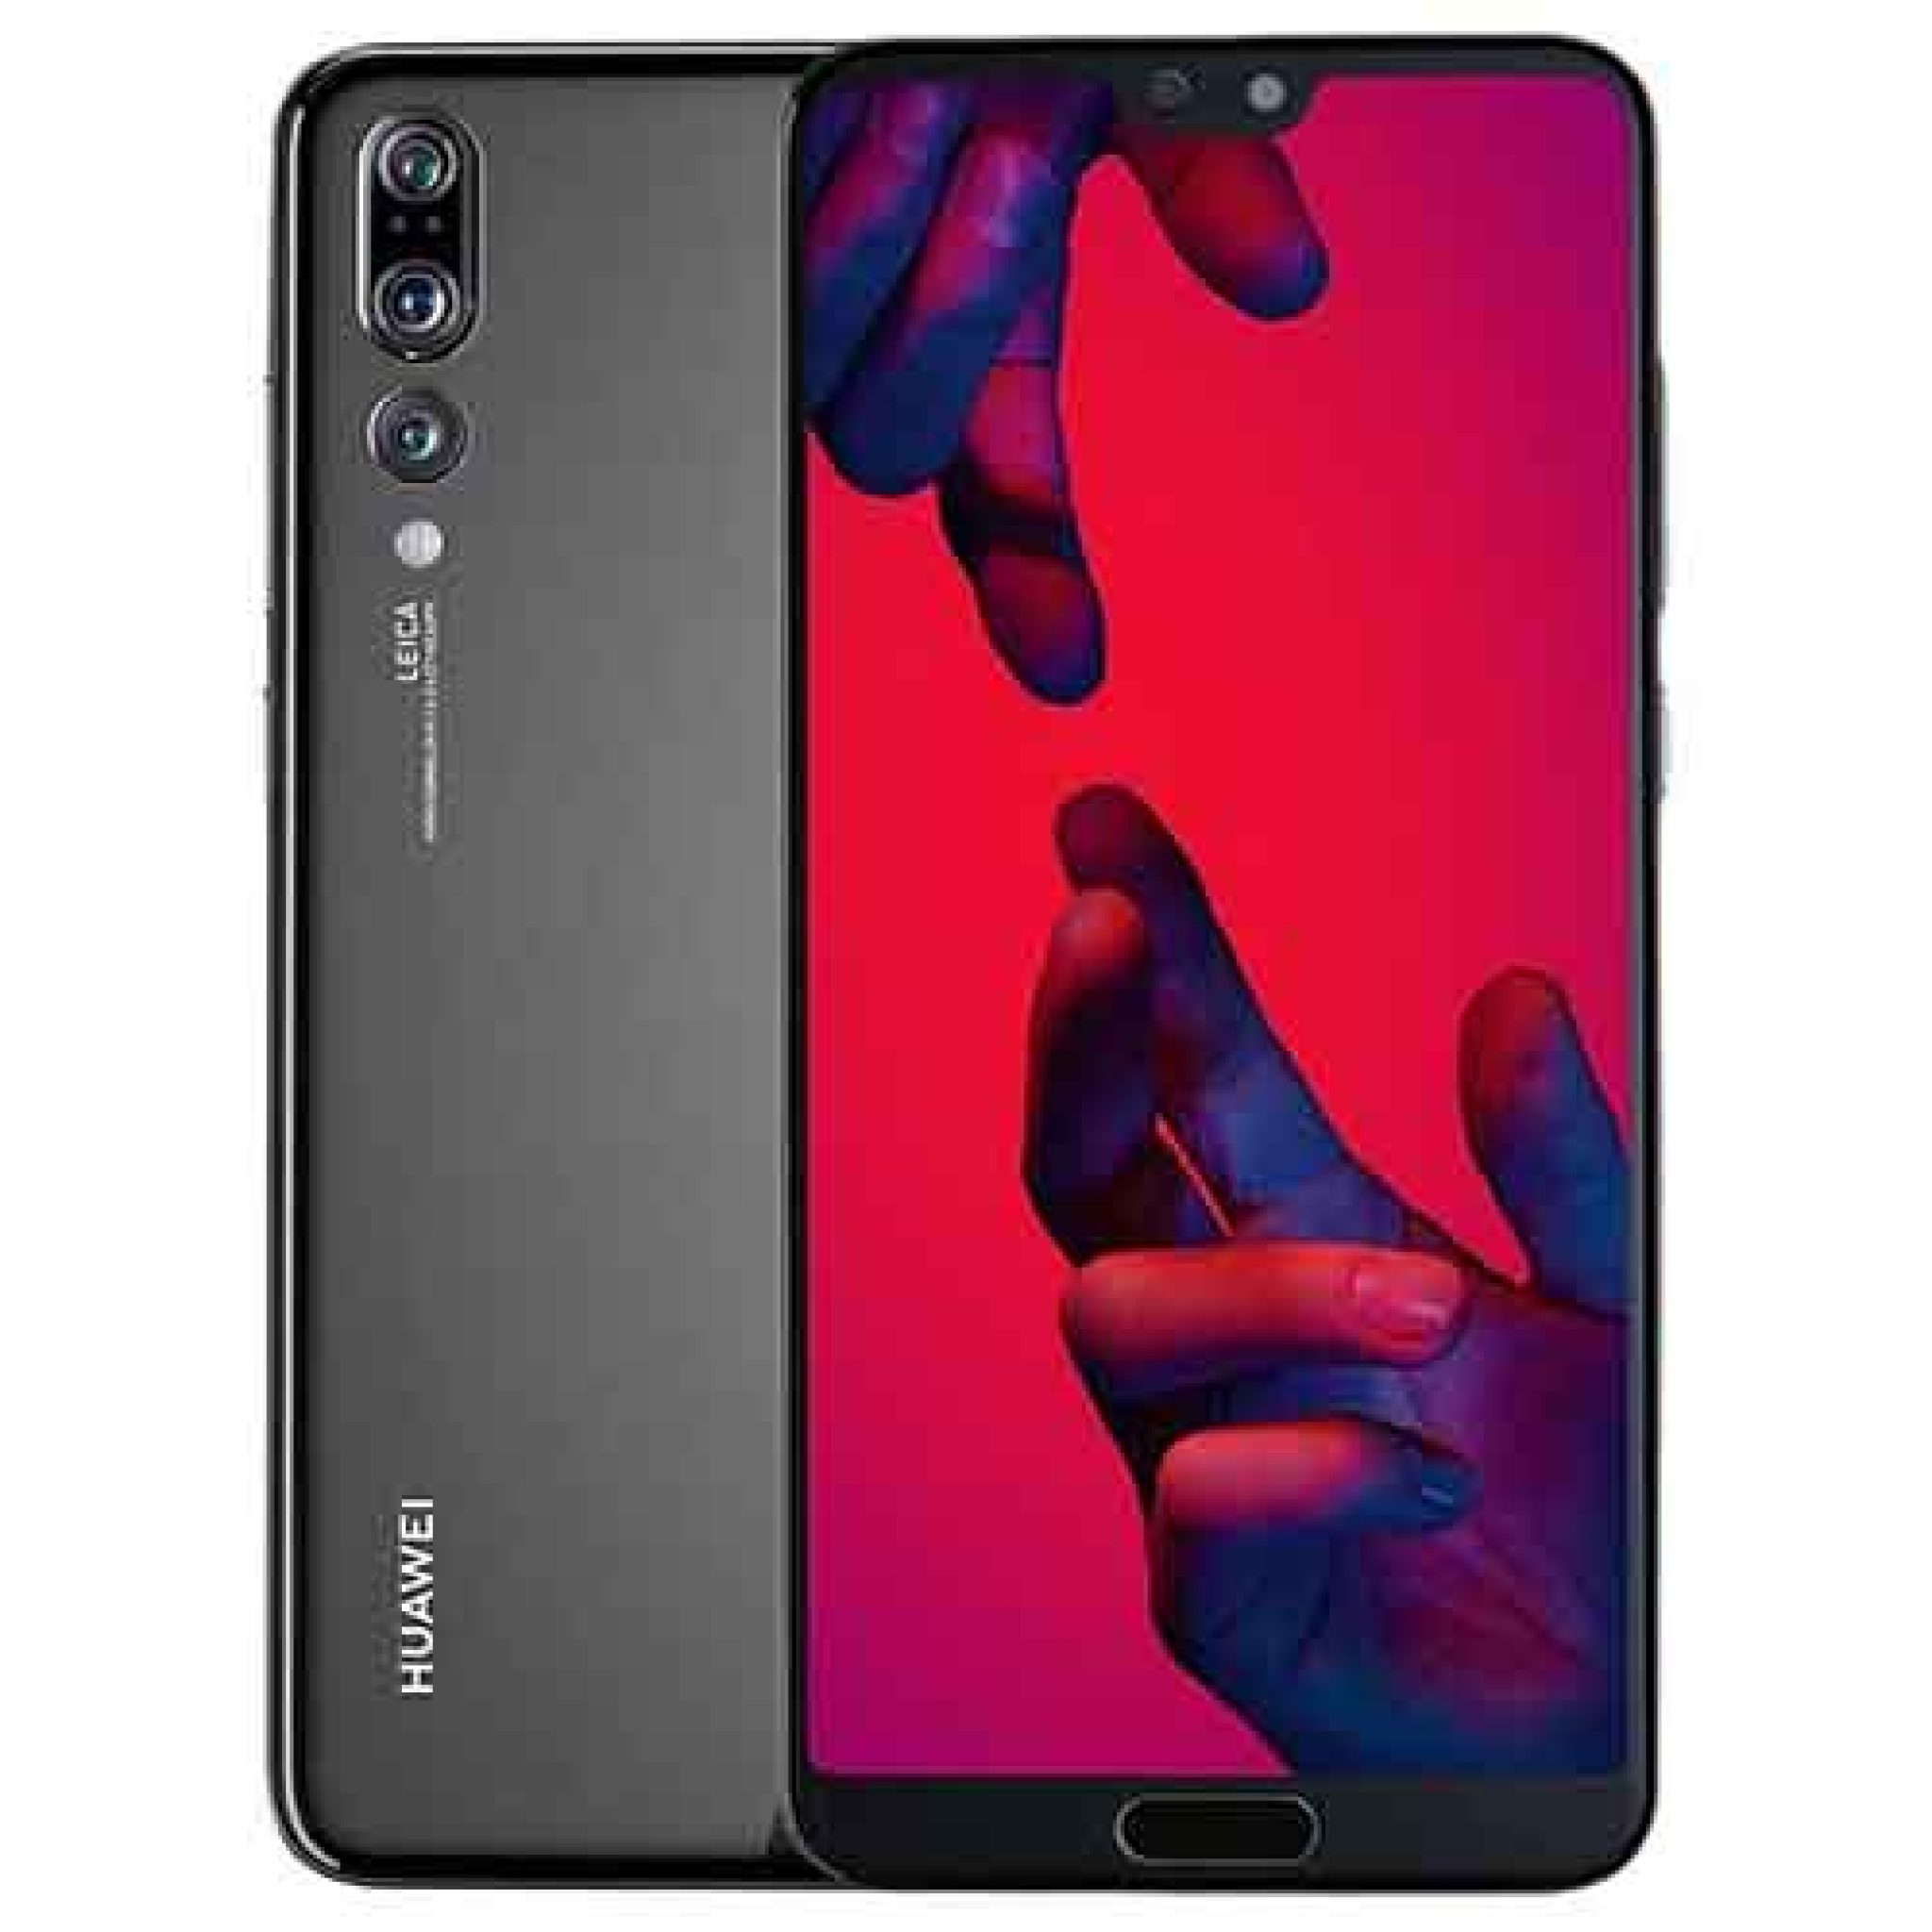 Huawei P20 Pro Price in Pakistan 2023 Compare Online Compareprice.pk